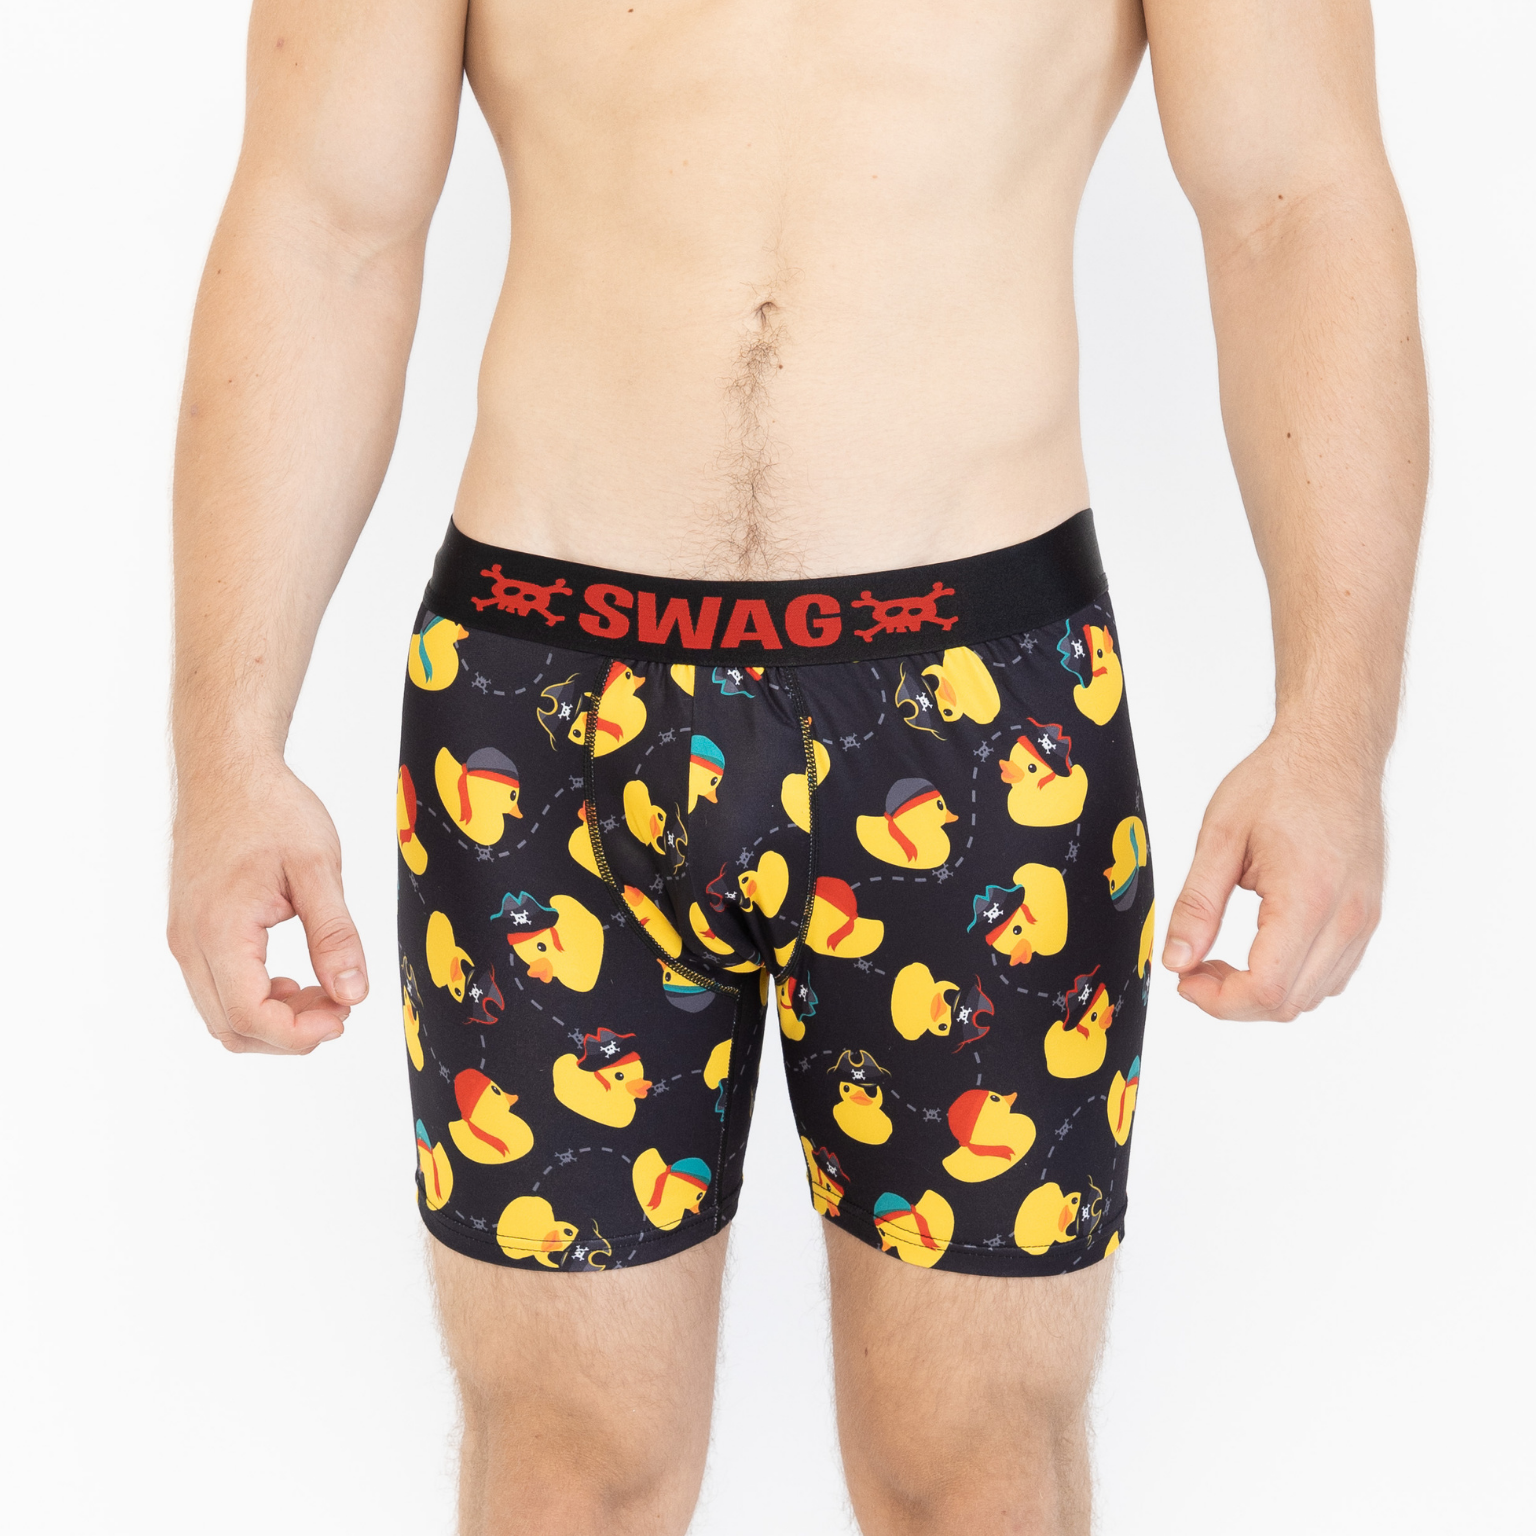 Pirate Life – SWAG Boxers